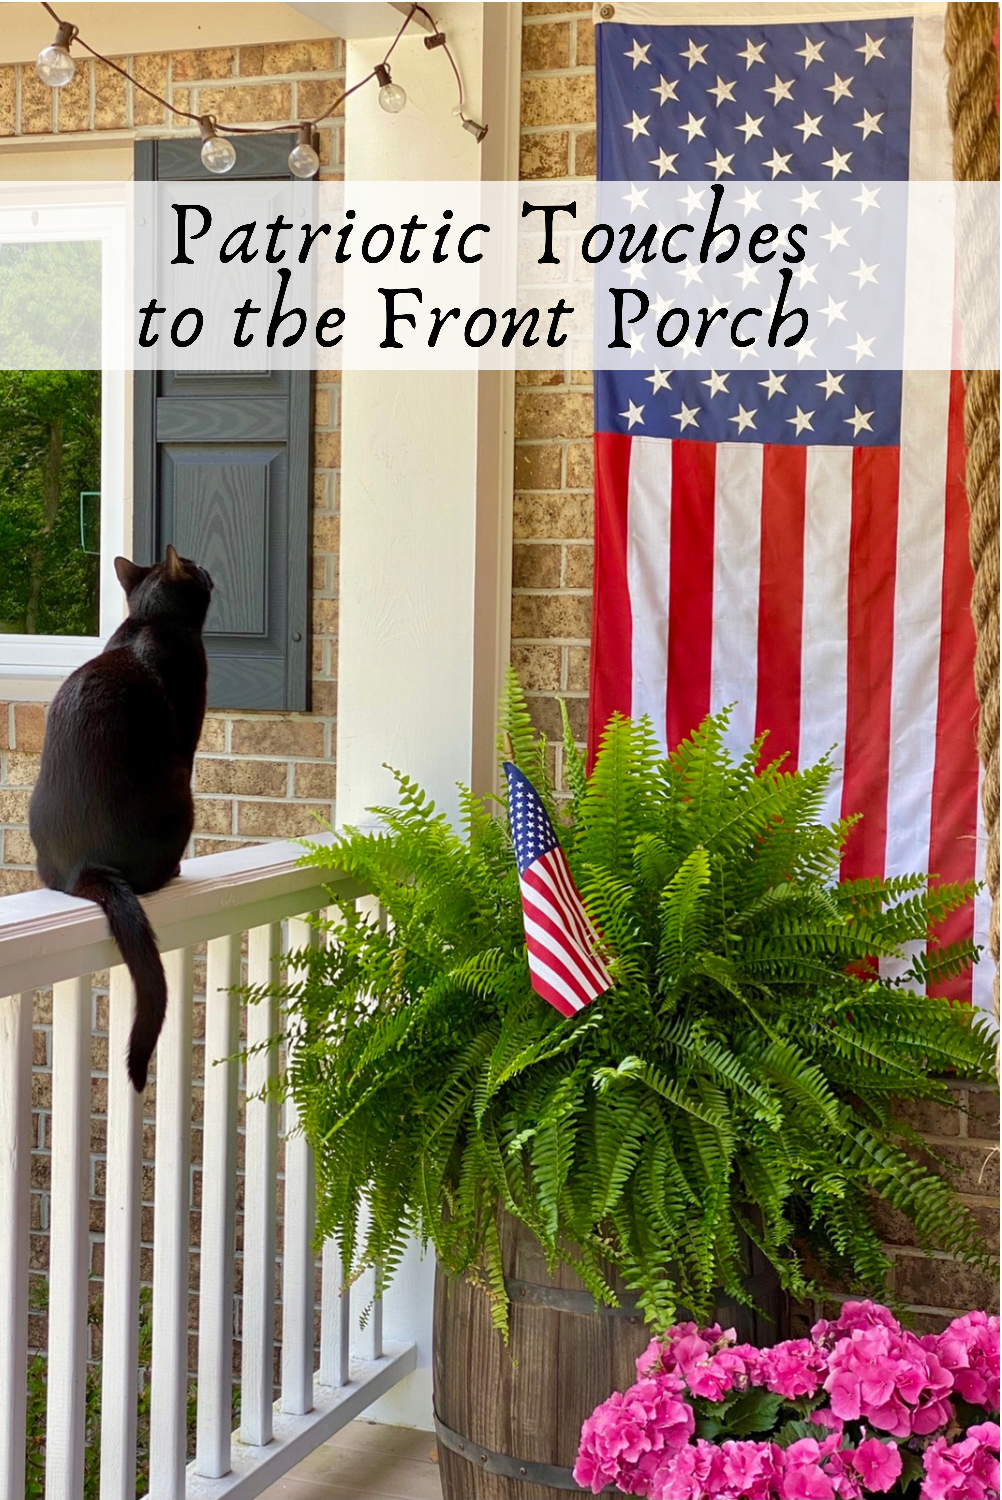 Pin for Pinterest. Black cat on the porch railing looking up at American flag on the wall of the front porch.